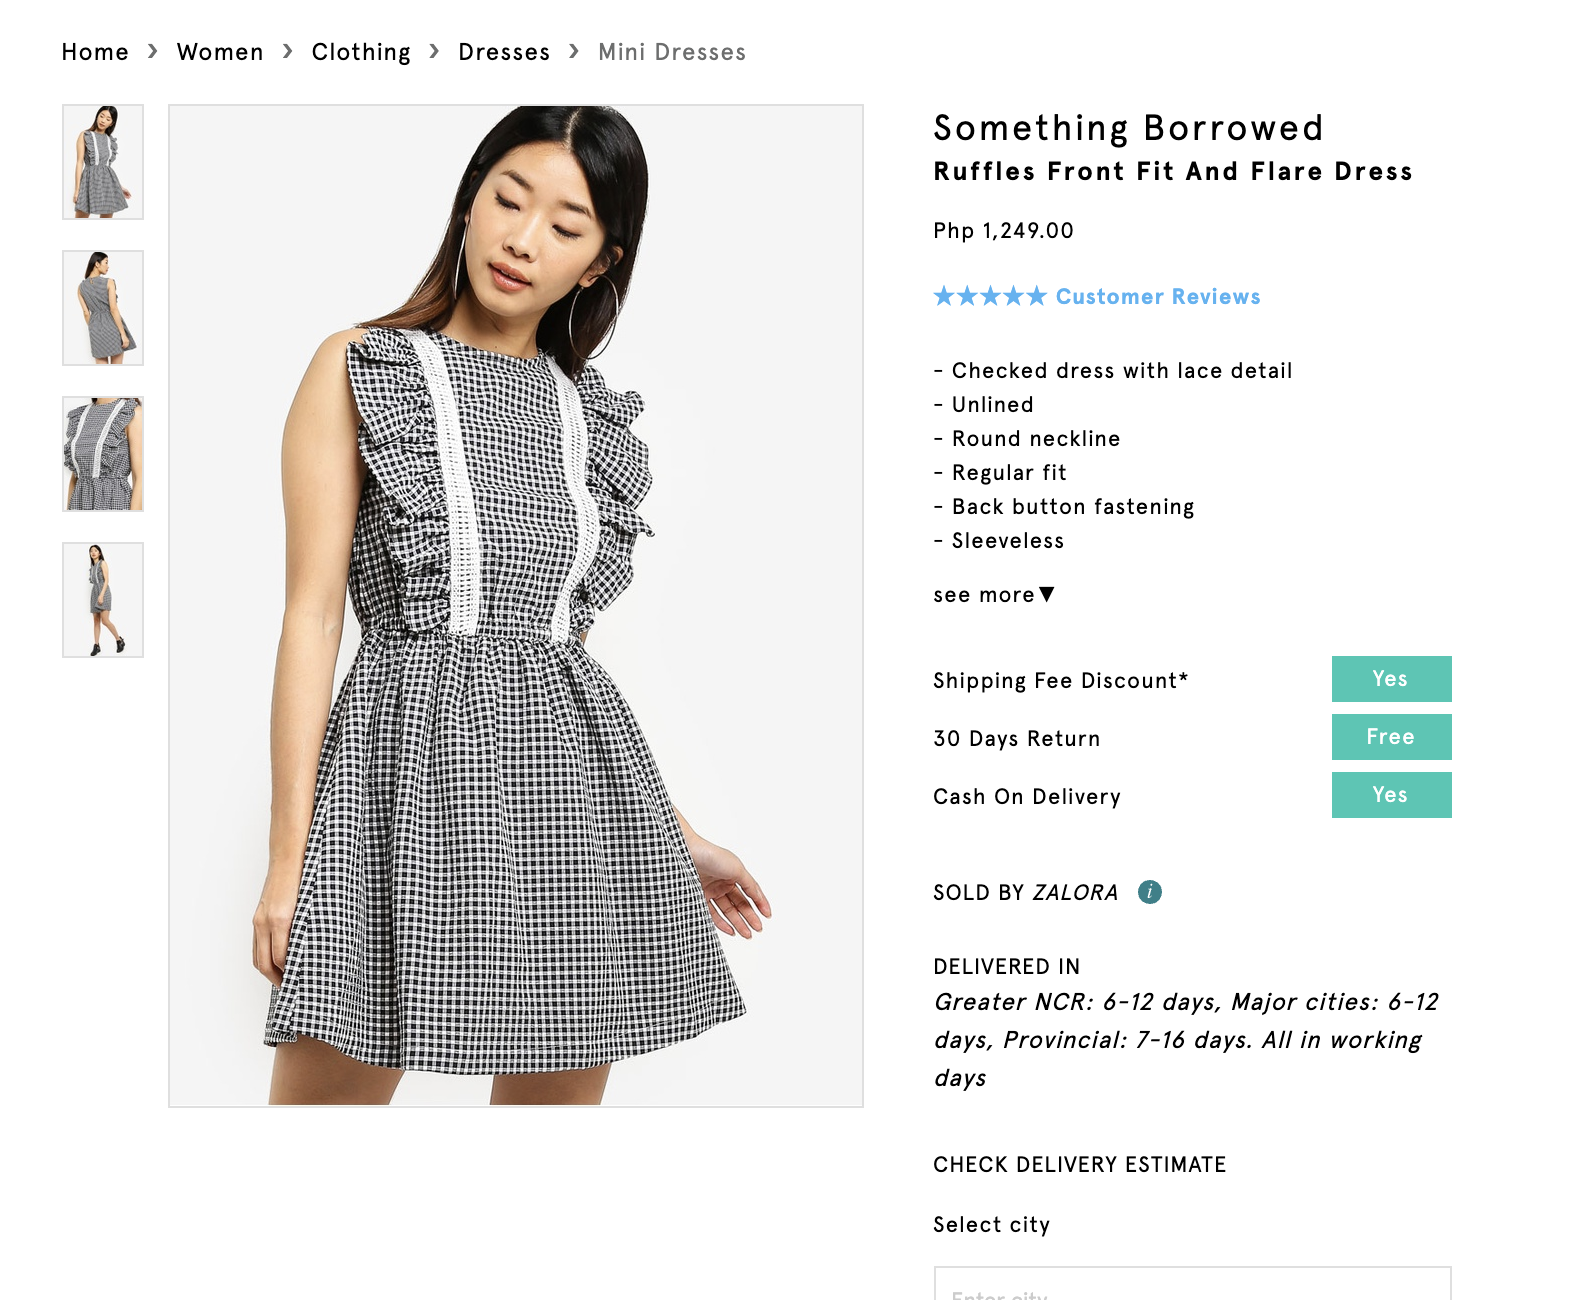 Screenshot of Something Borrowed Fit and Flare Dress